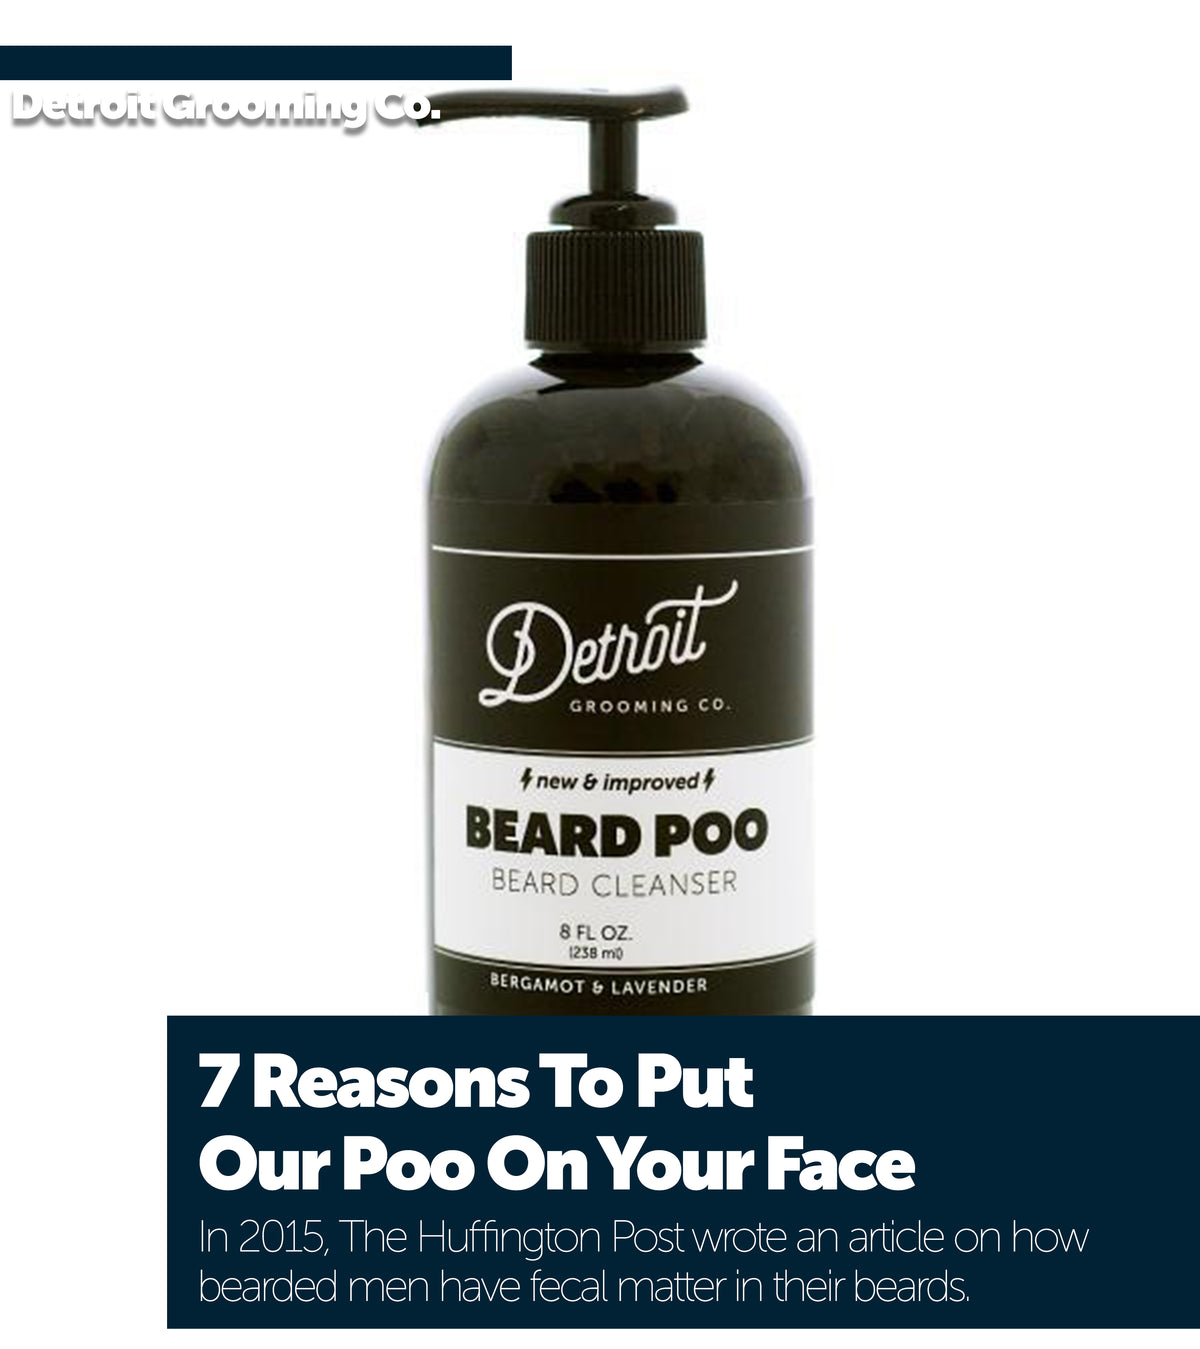 7 Reasons To Put Our Poo On Your Face